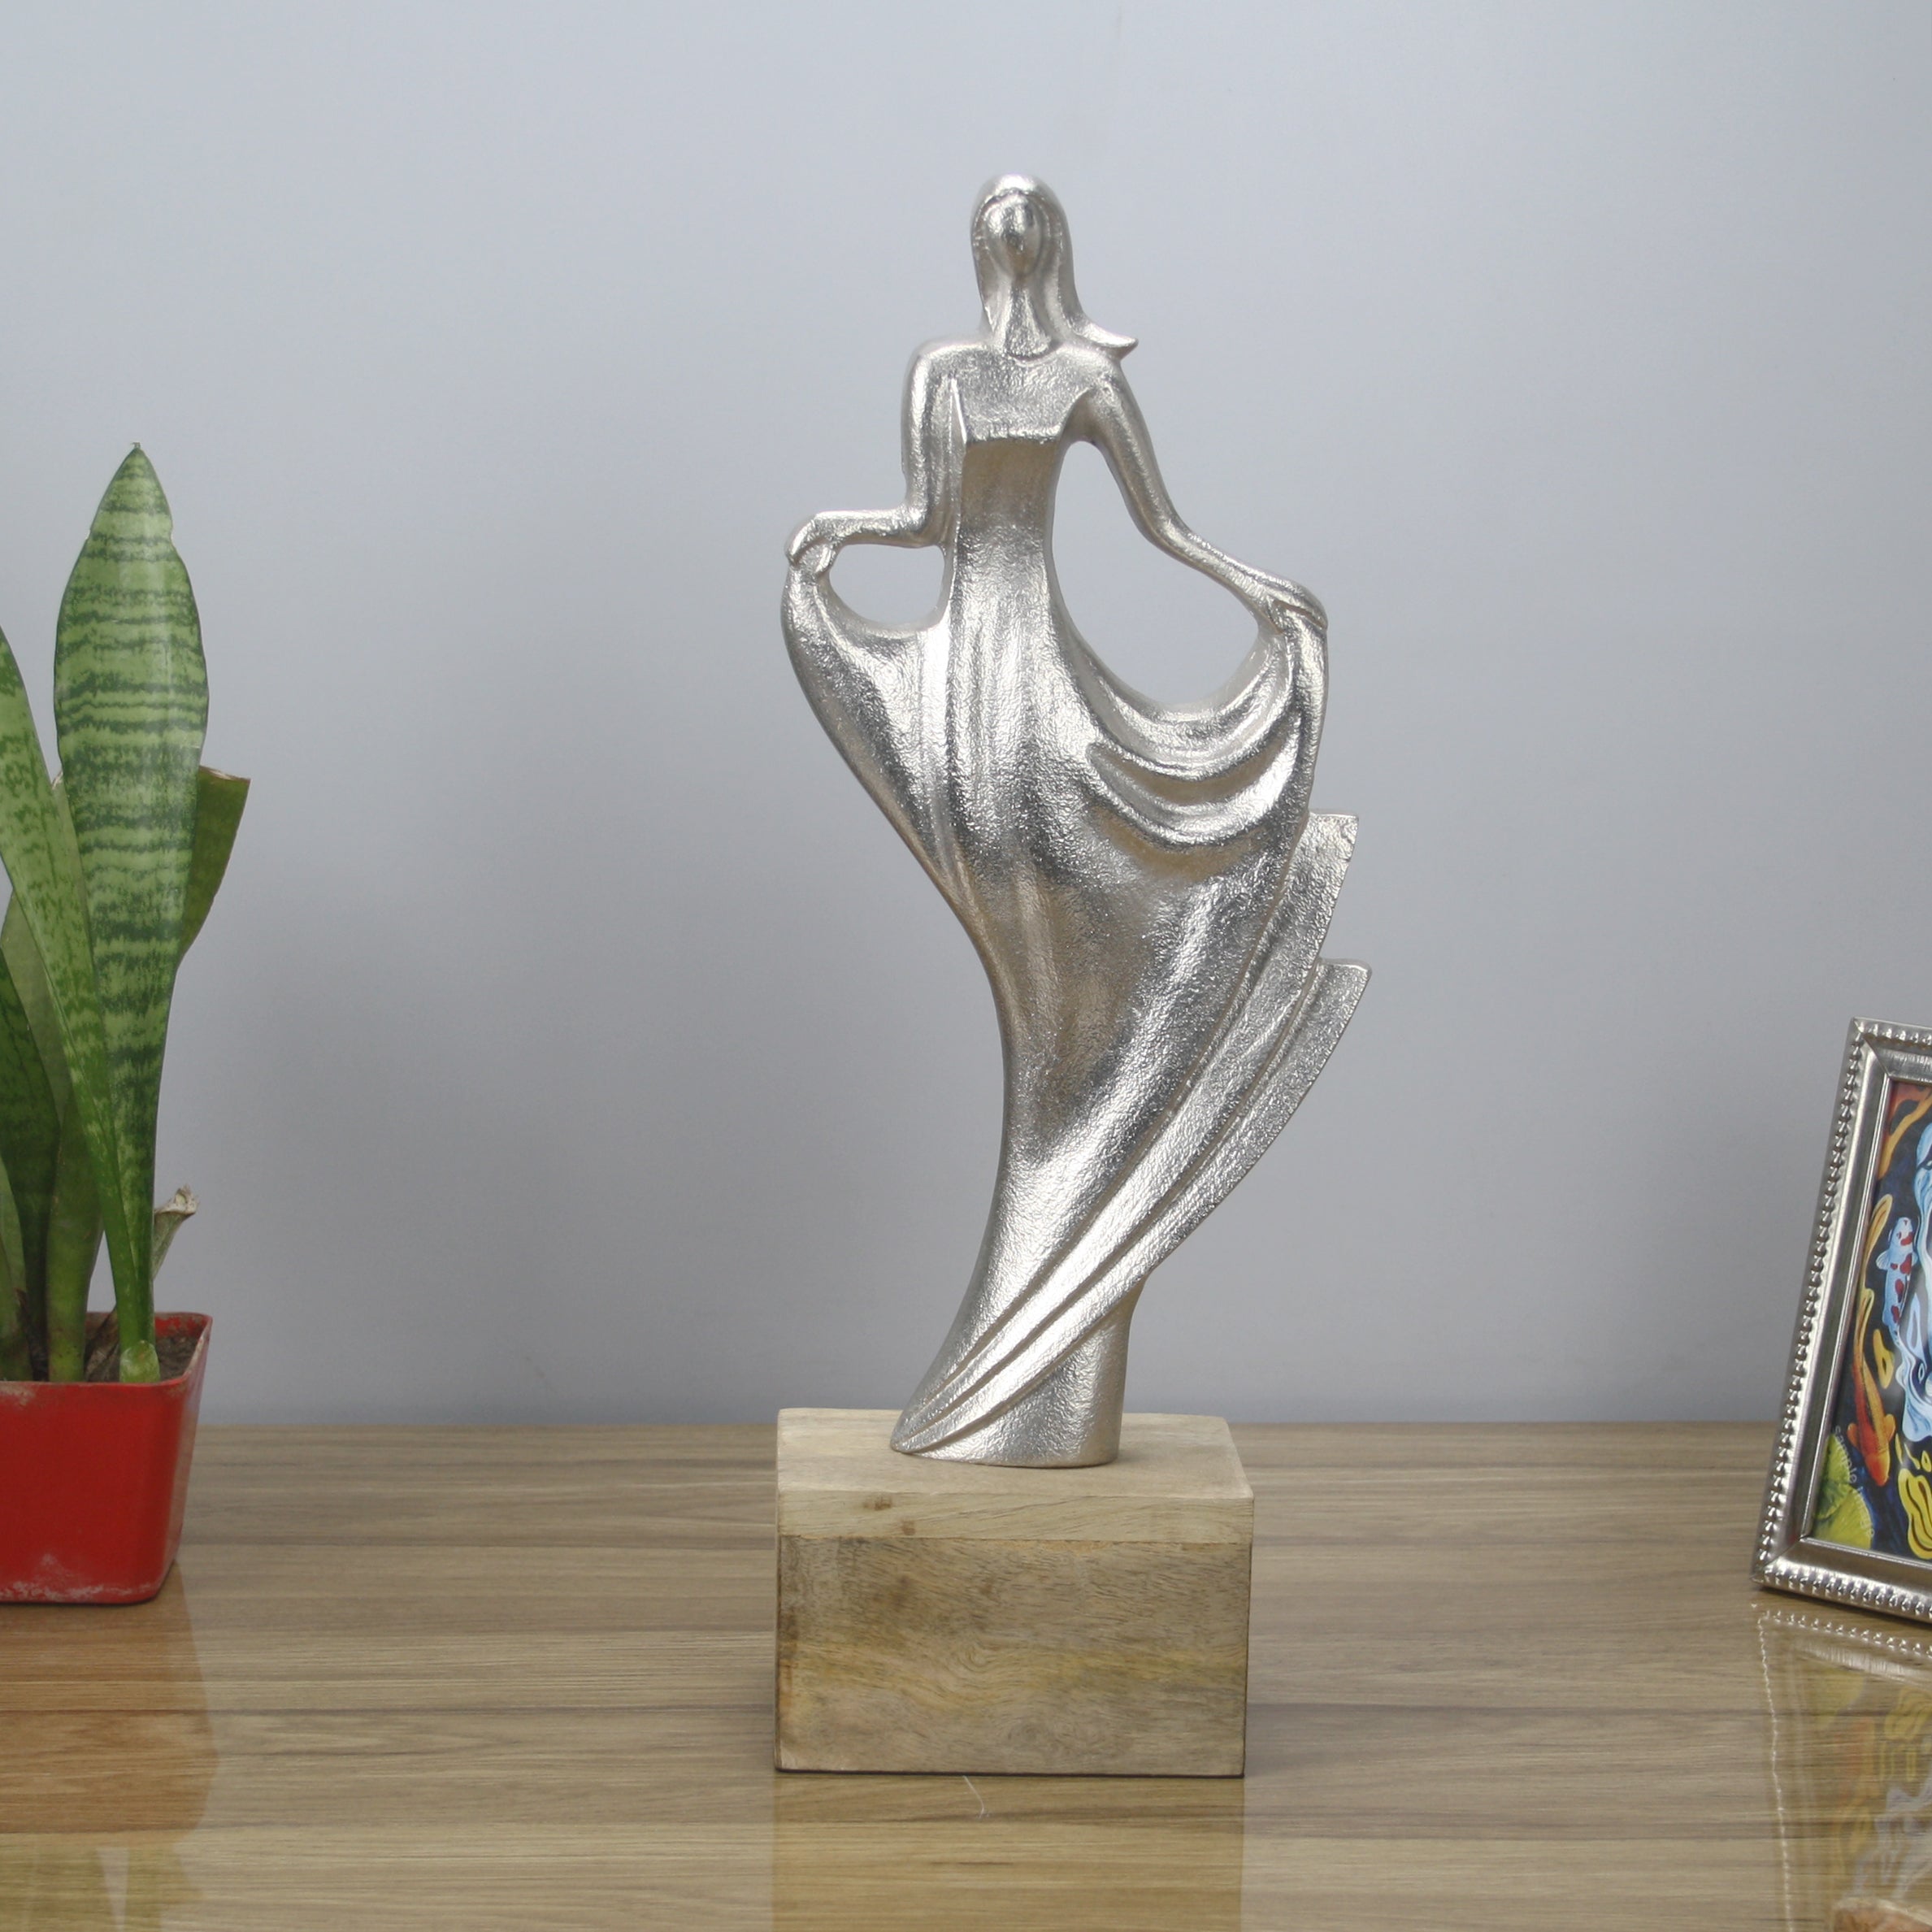 Whimsy Silver Lady Figurine